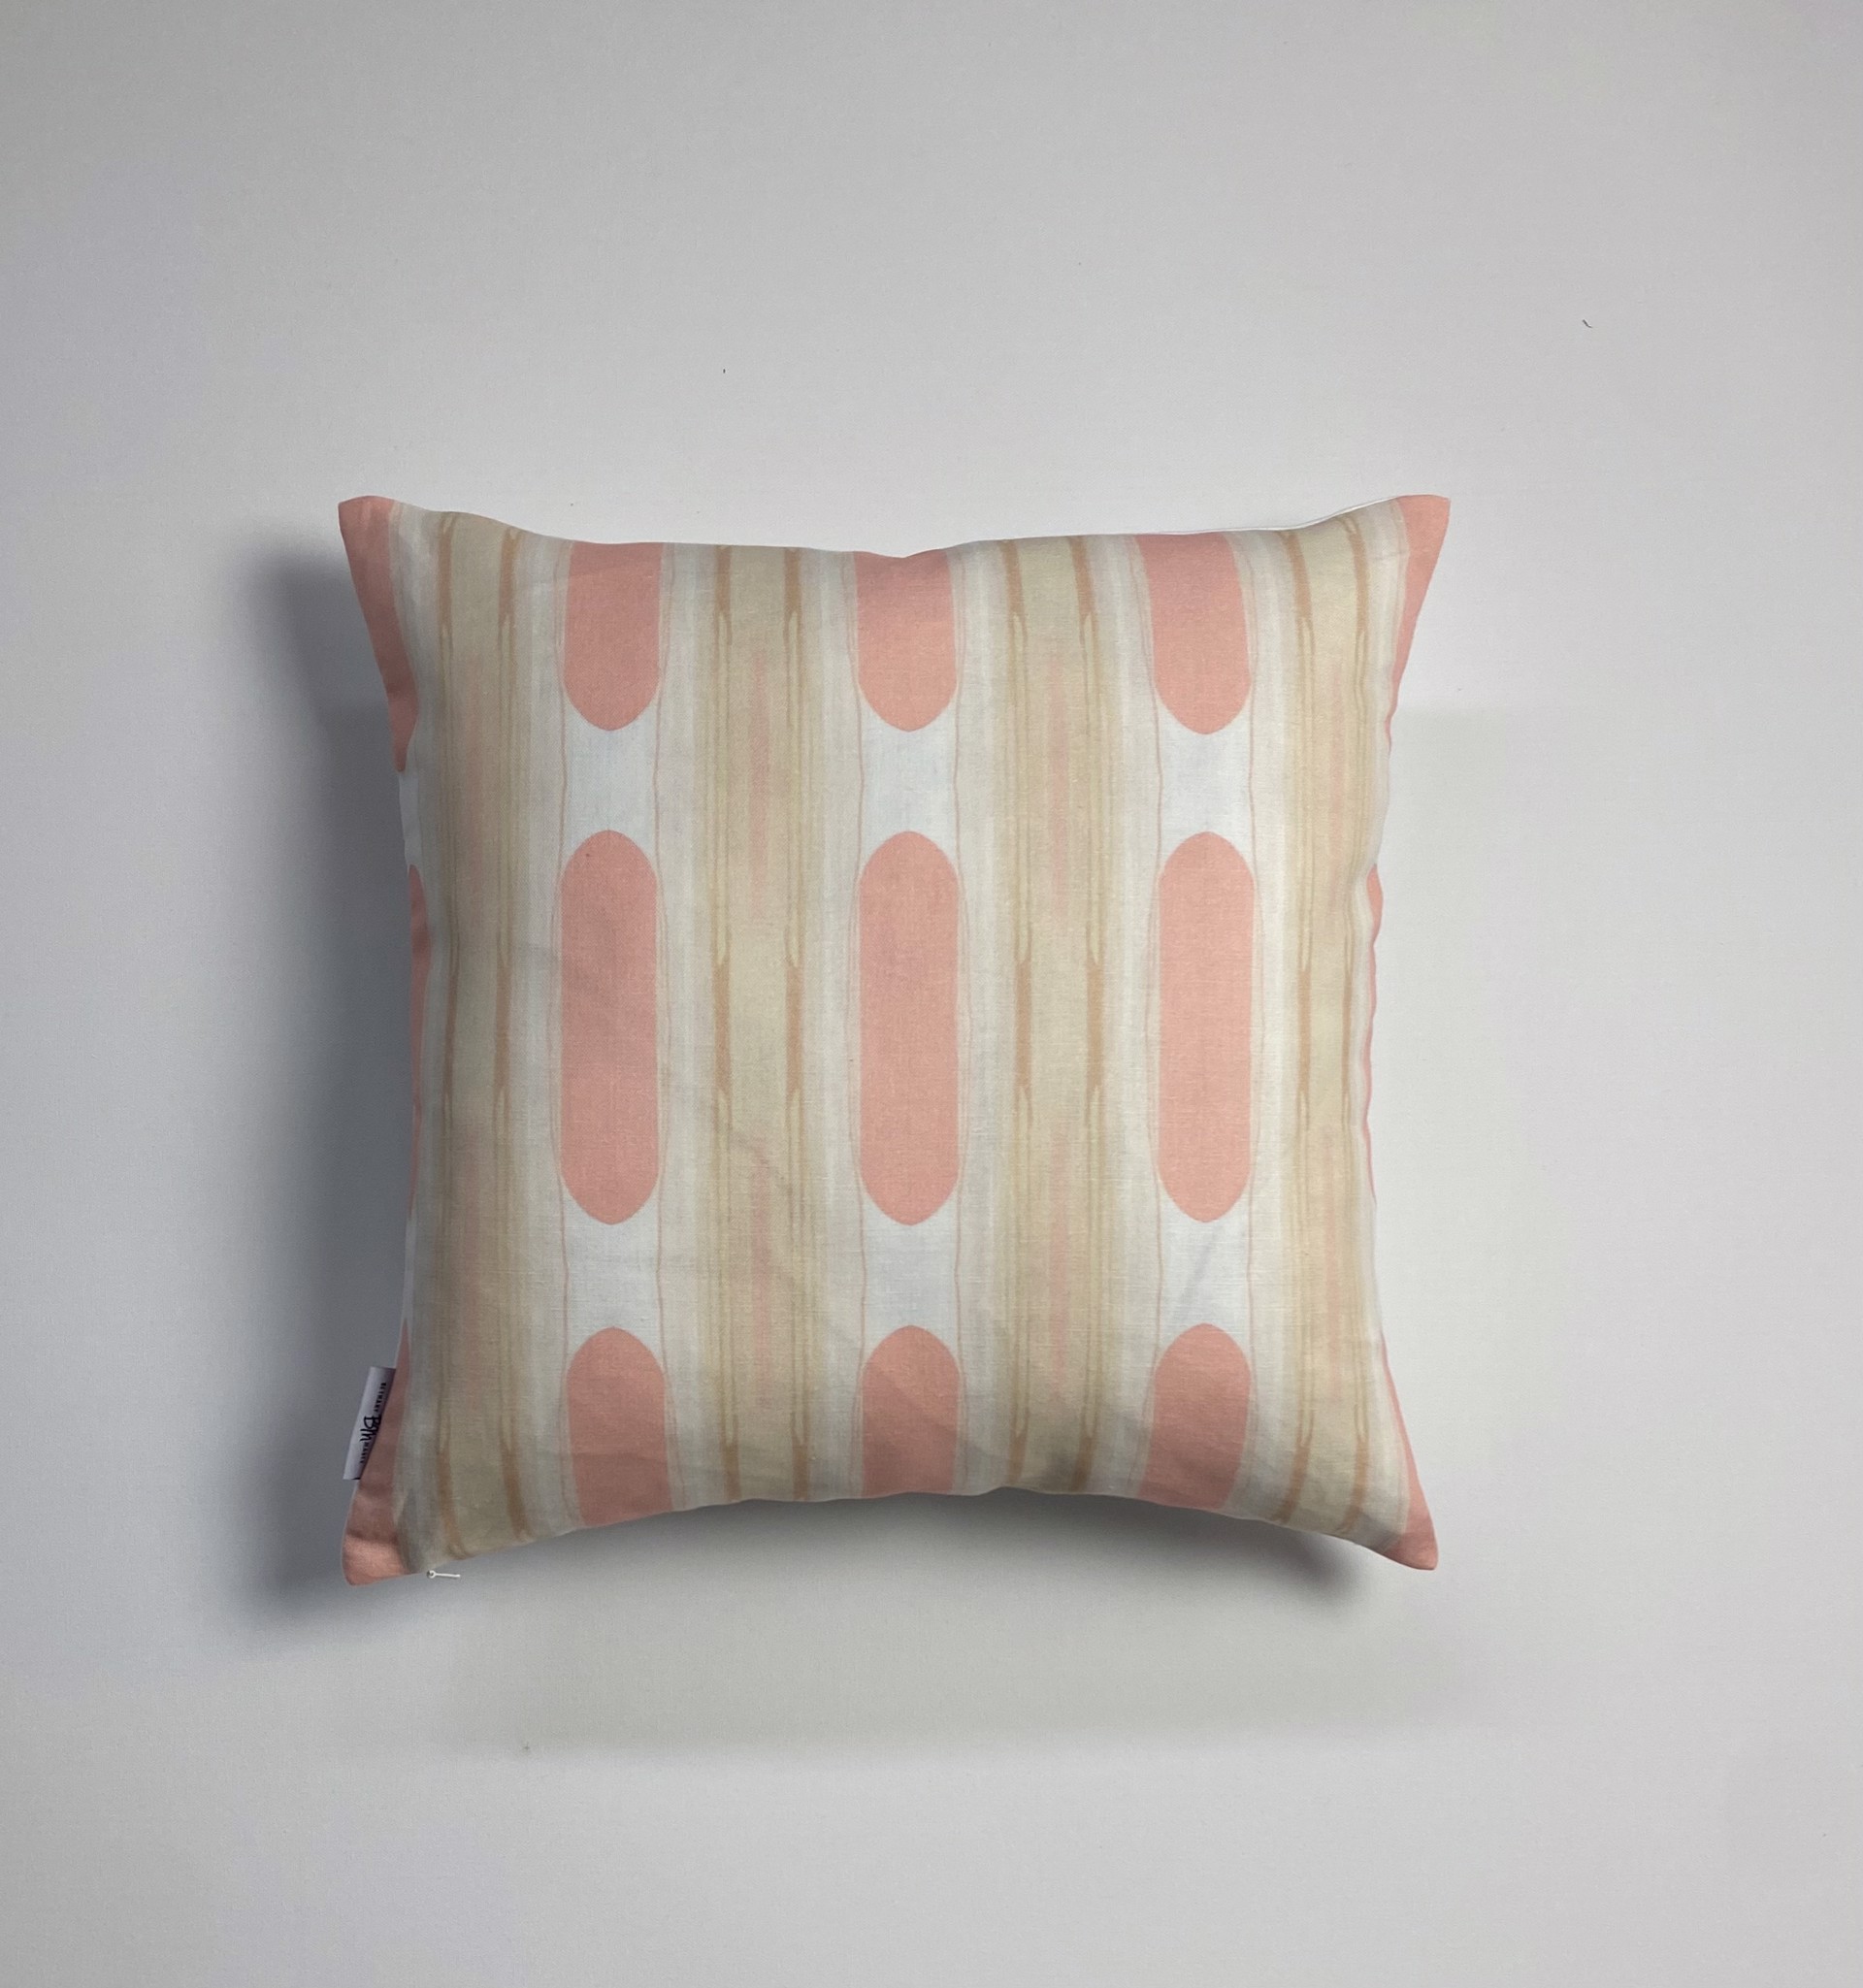 Crystalline Pillow by Bethany Mabee